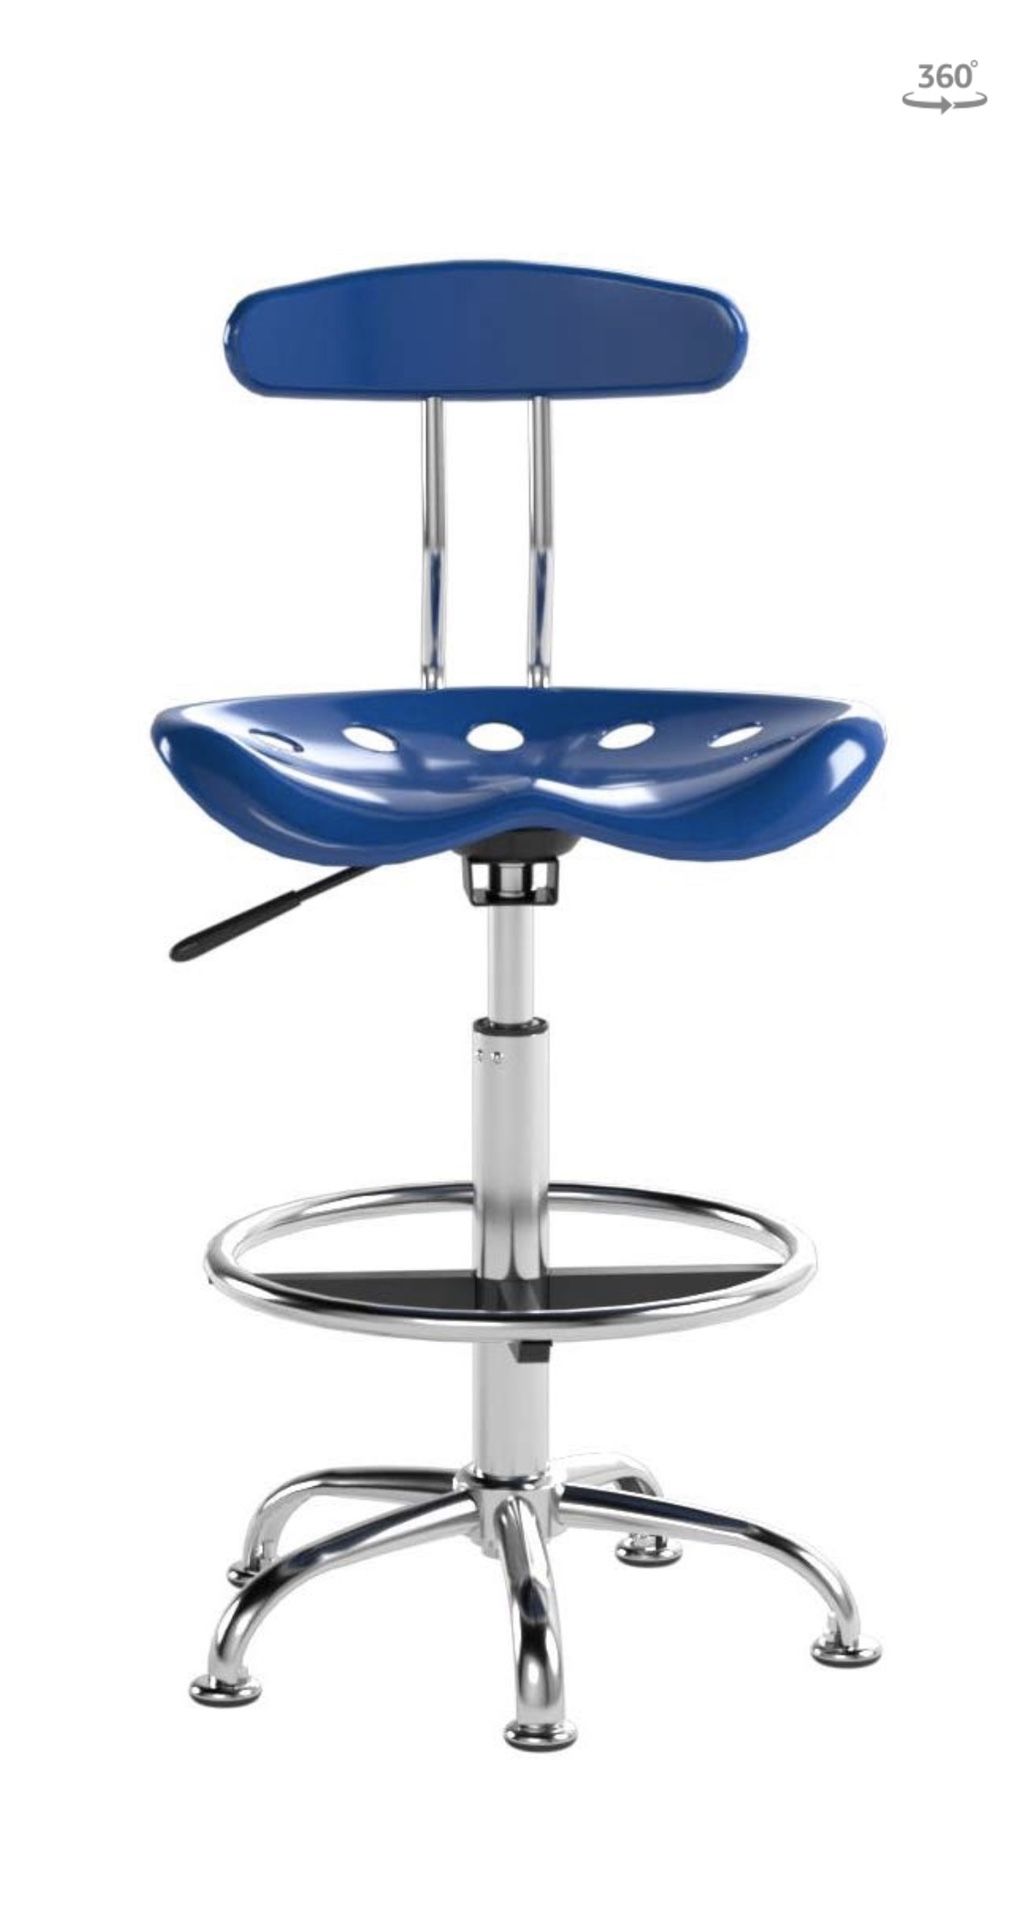 Chair (stool) stainless steel blue four available, silla acero inoxidable azul 4 disponibles